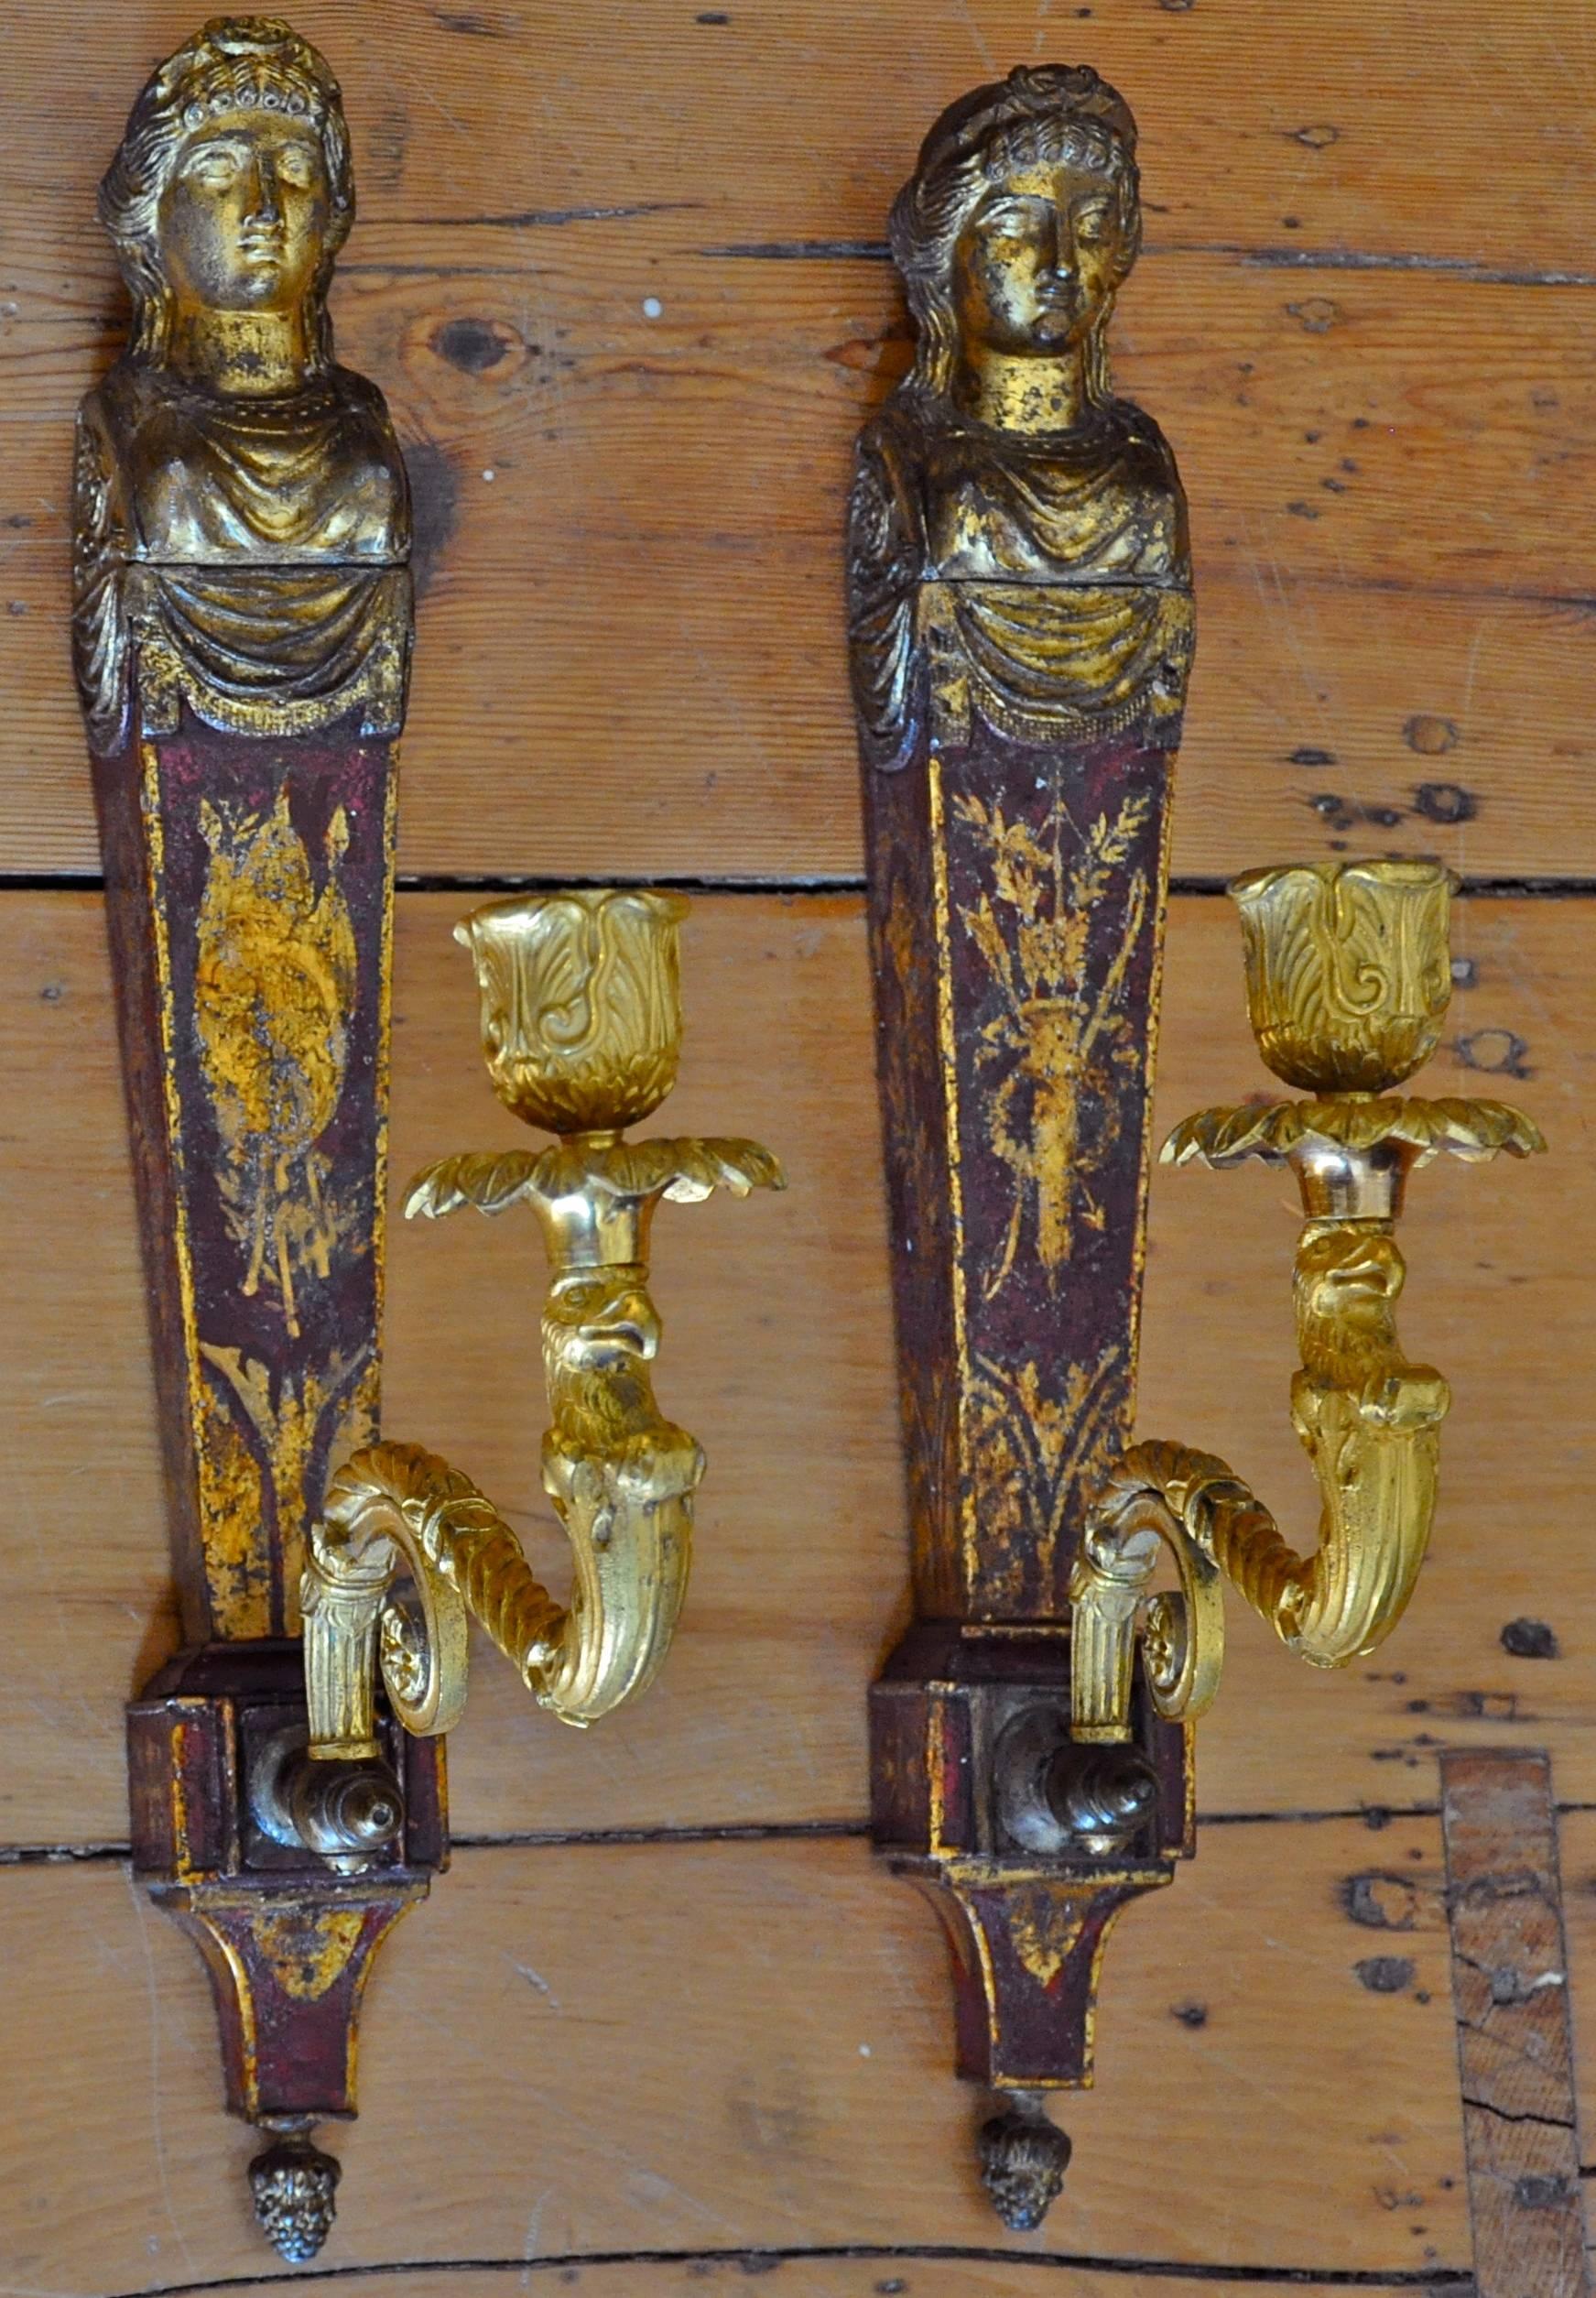 Period French Empire one arm tole and gilt wall sconces.

Red tole with neoclassical trophies
Single candle arm of eagle head
Female herm bust in gilt.